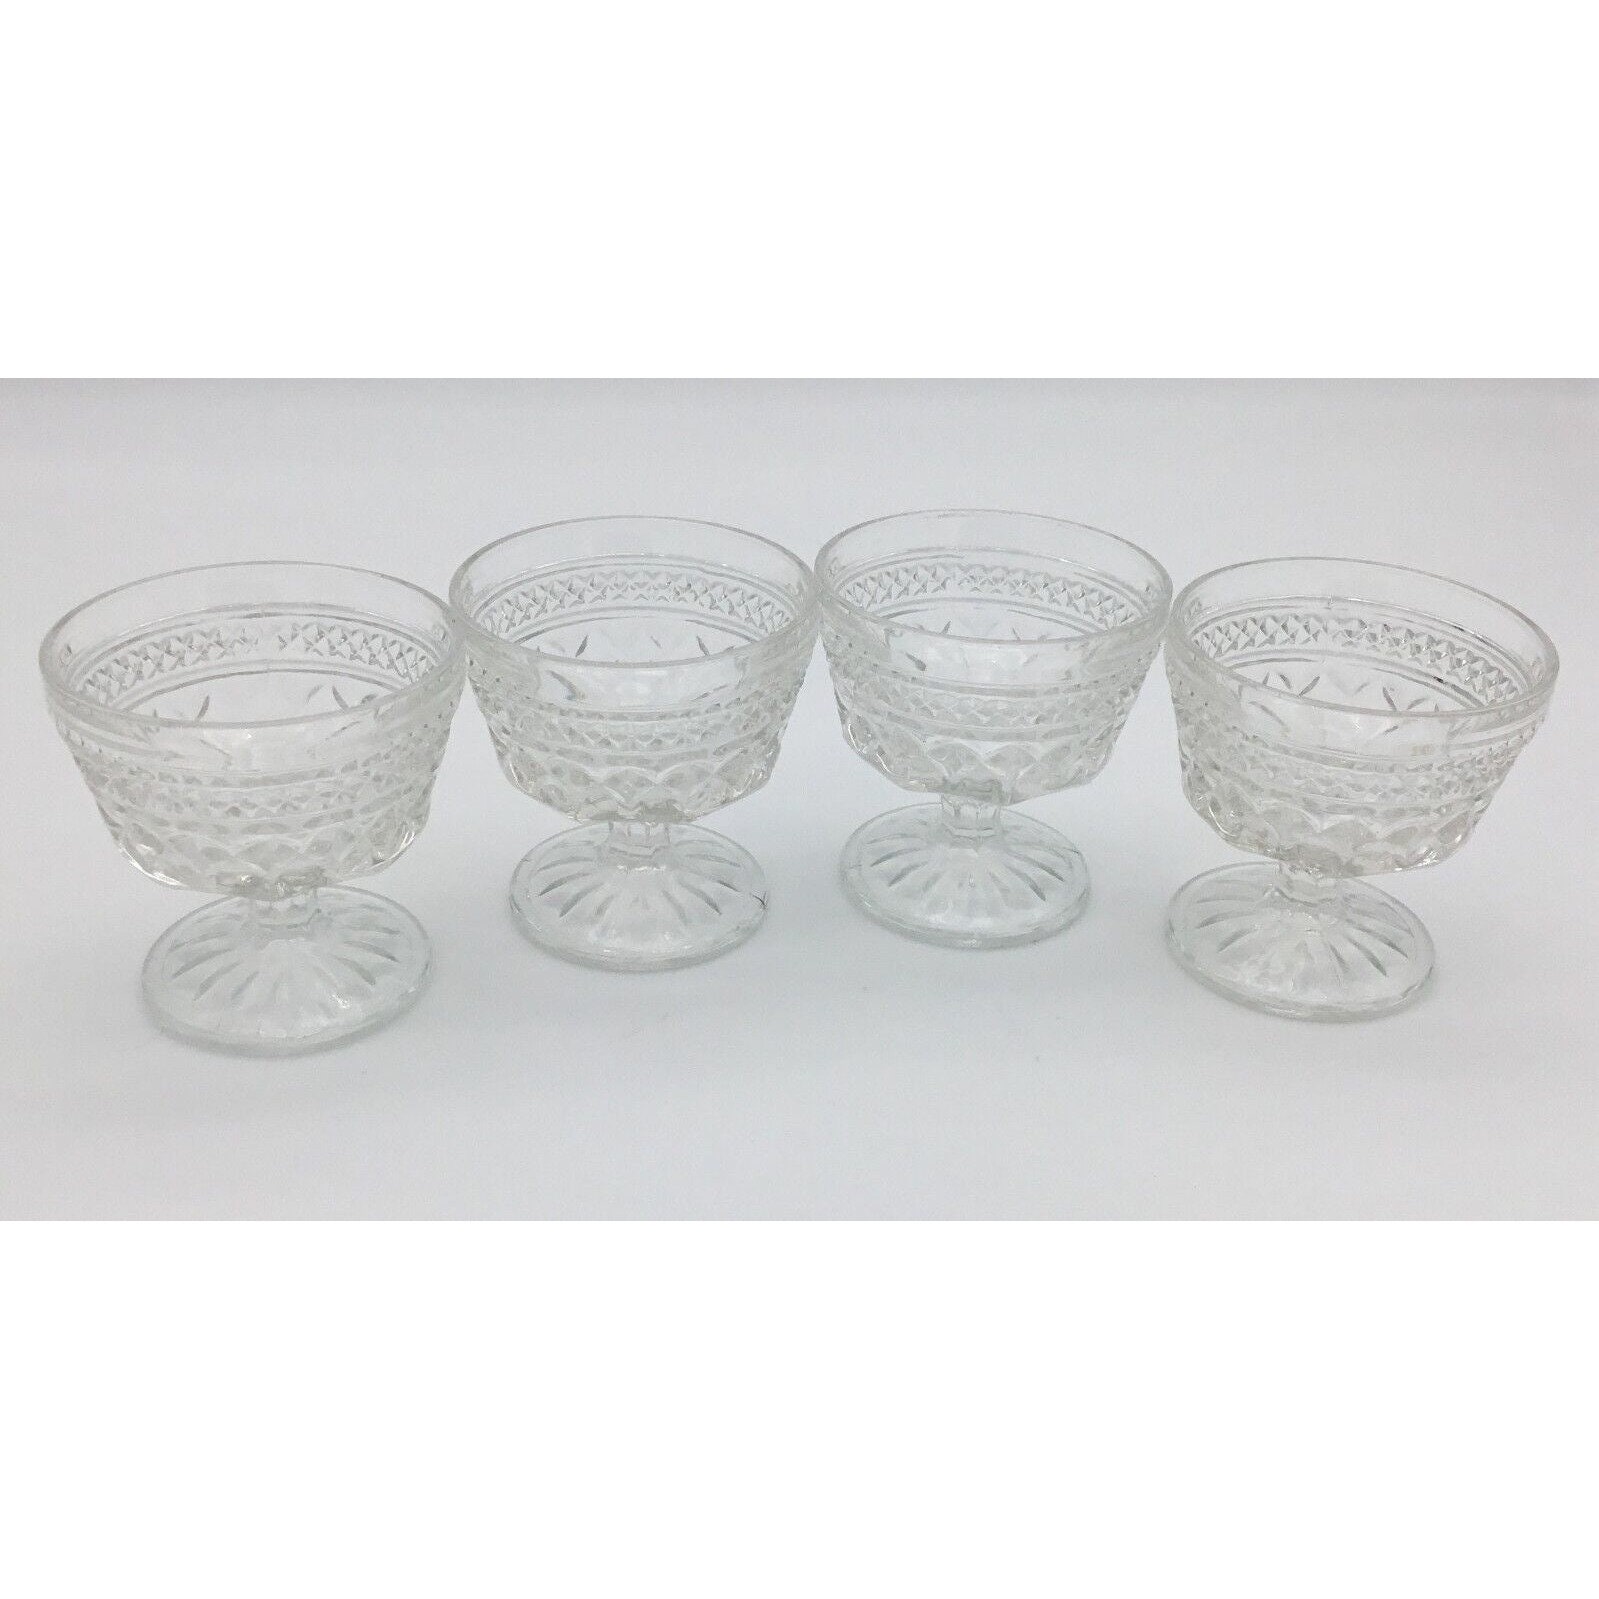 3PCs Set Small Cute Footed Tulip Glass Dessert Bowls/Cups - Perfect for  Dessert, Ice Cream, Fruit